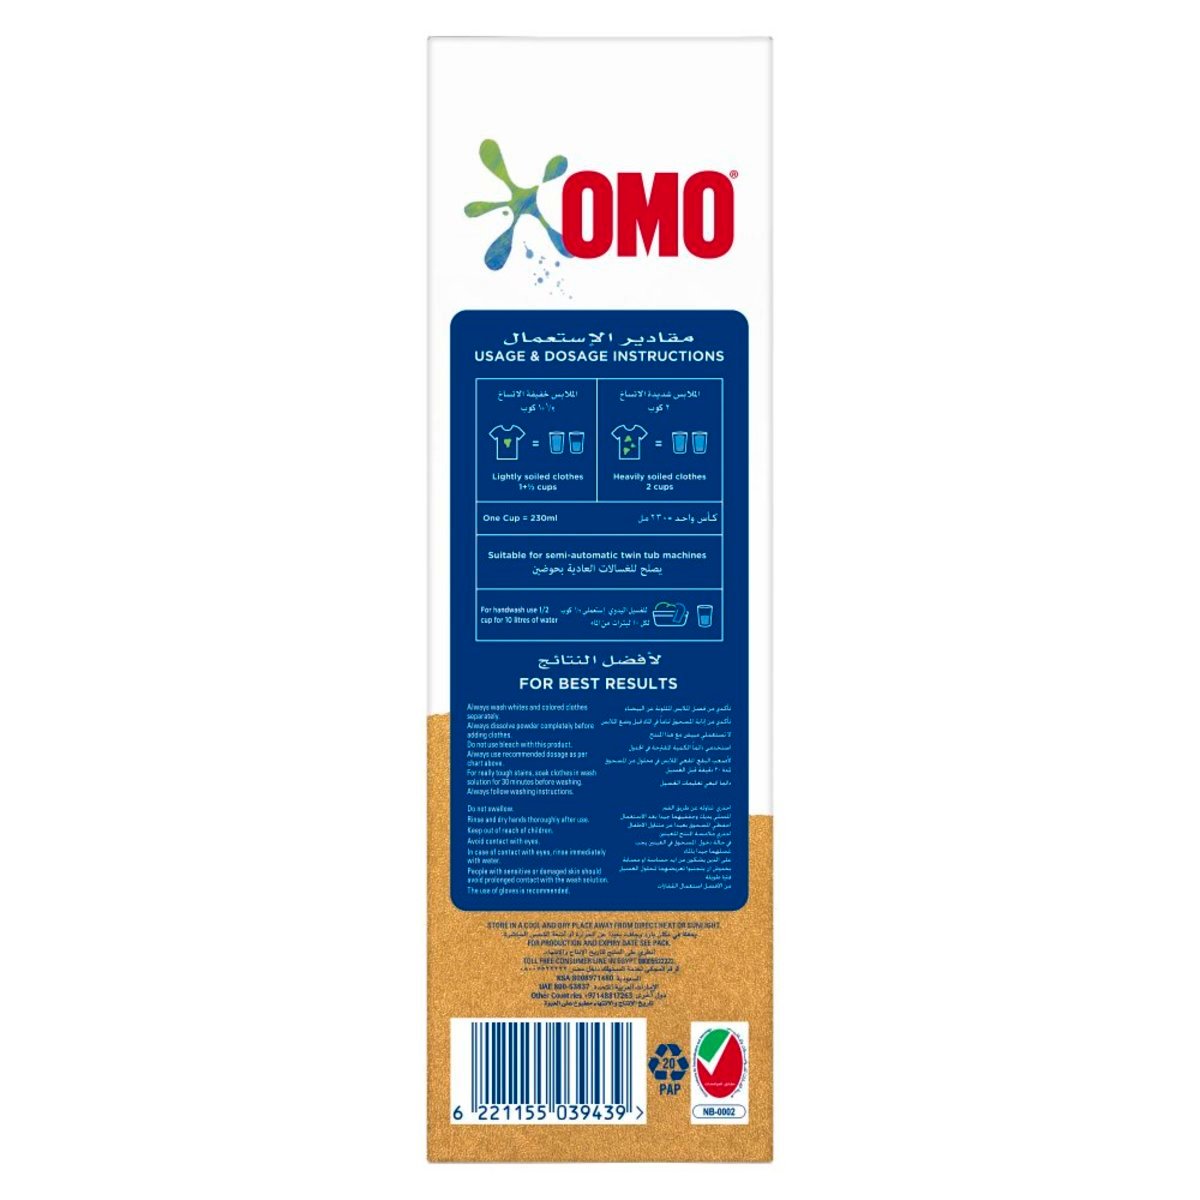 OMO Top Load Laundry Detergent Powder with Comfort Oud 2.5kg